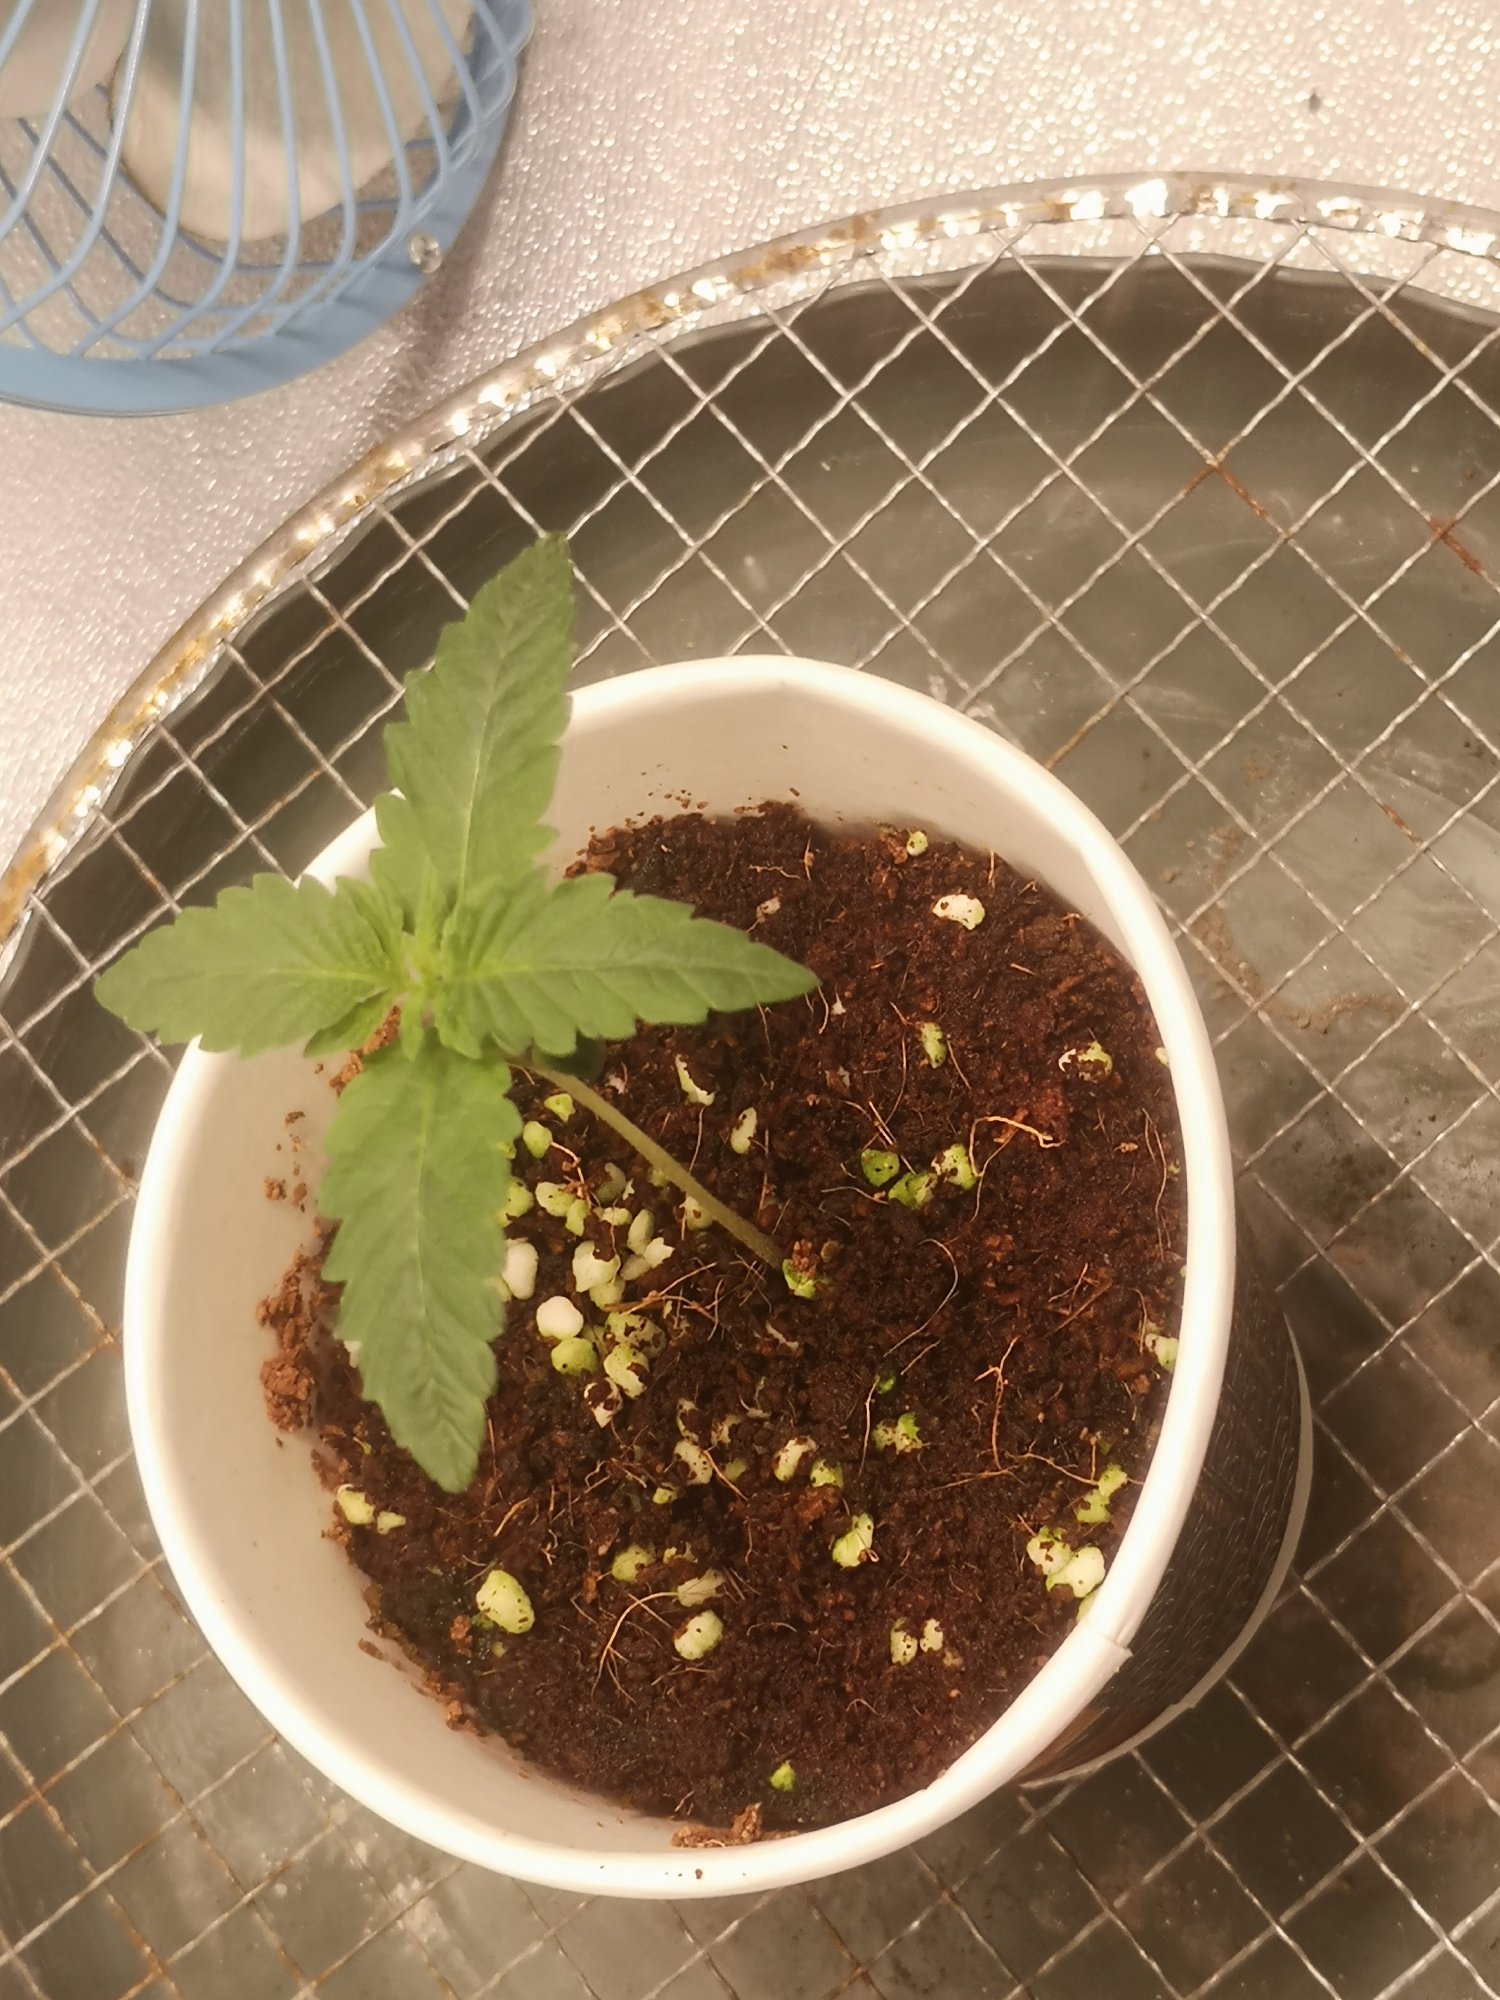 First time official coco grow